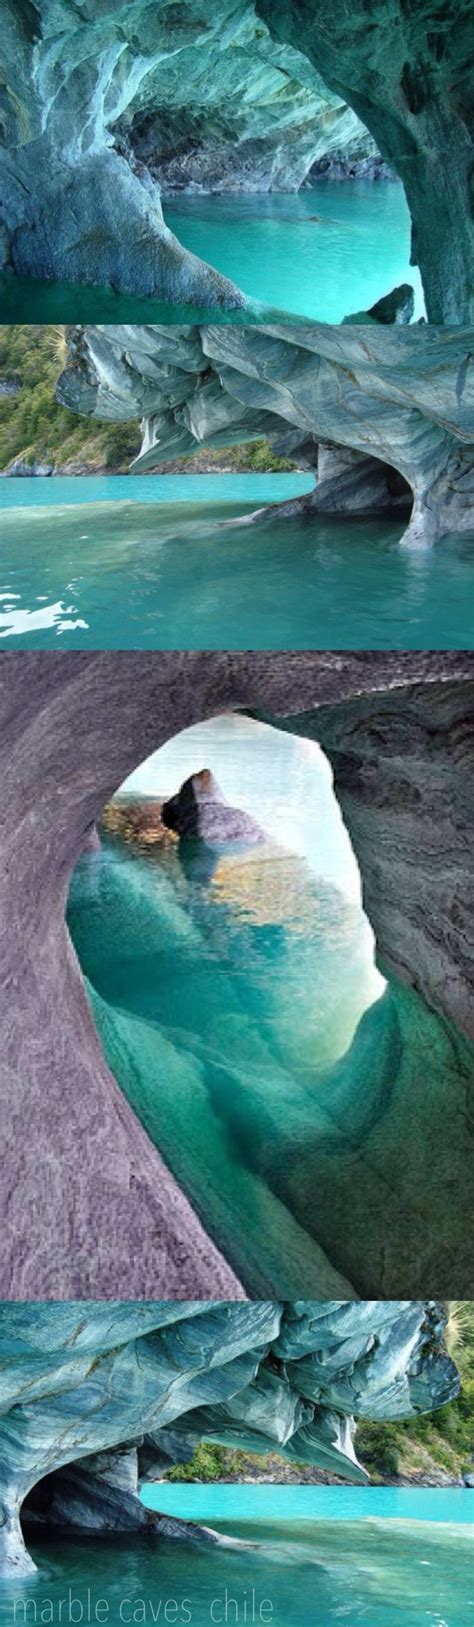 Chile Marble Caves Chile My Creator Is An Amazing And Wonderful